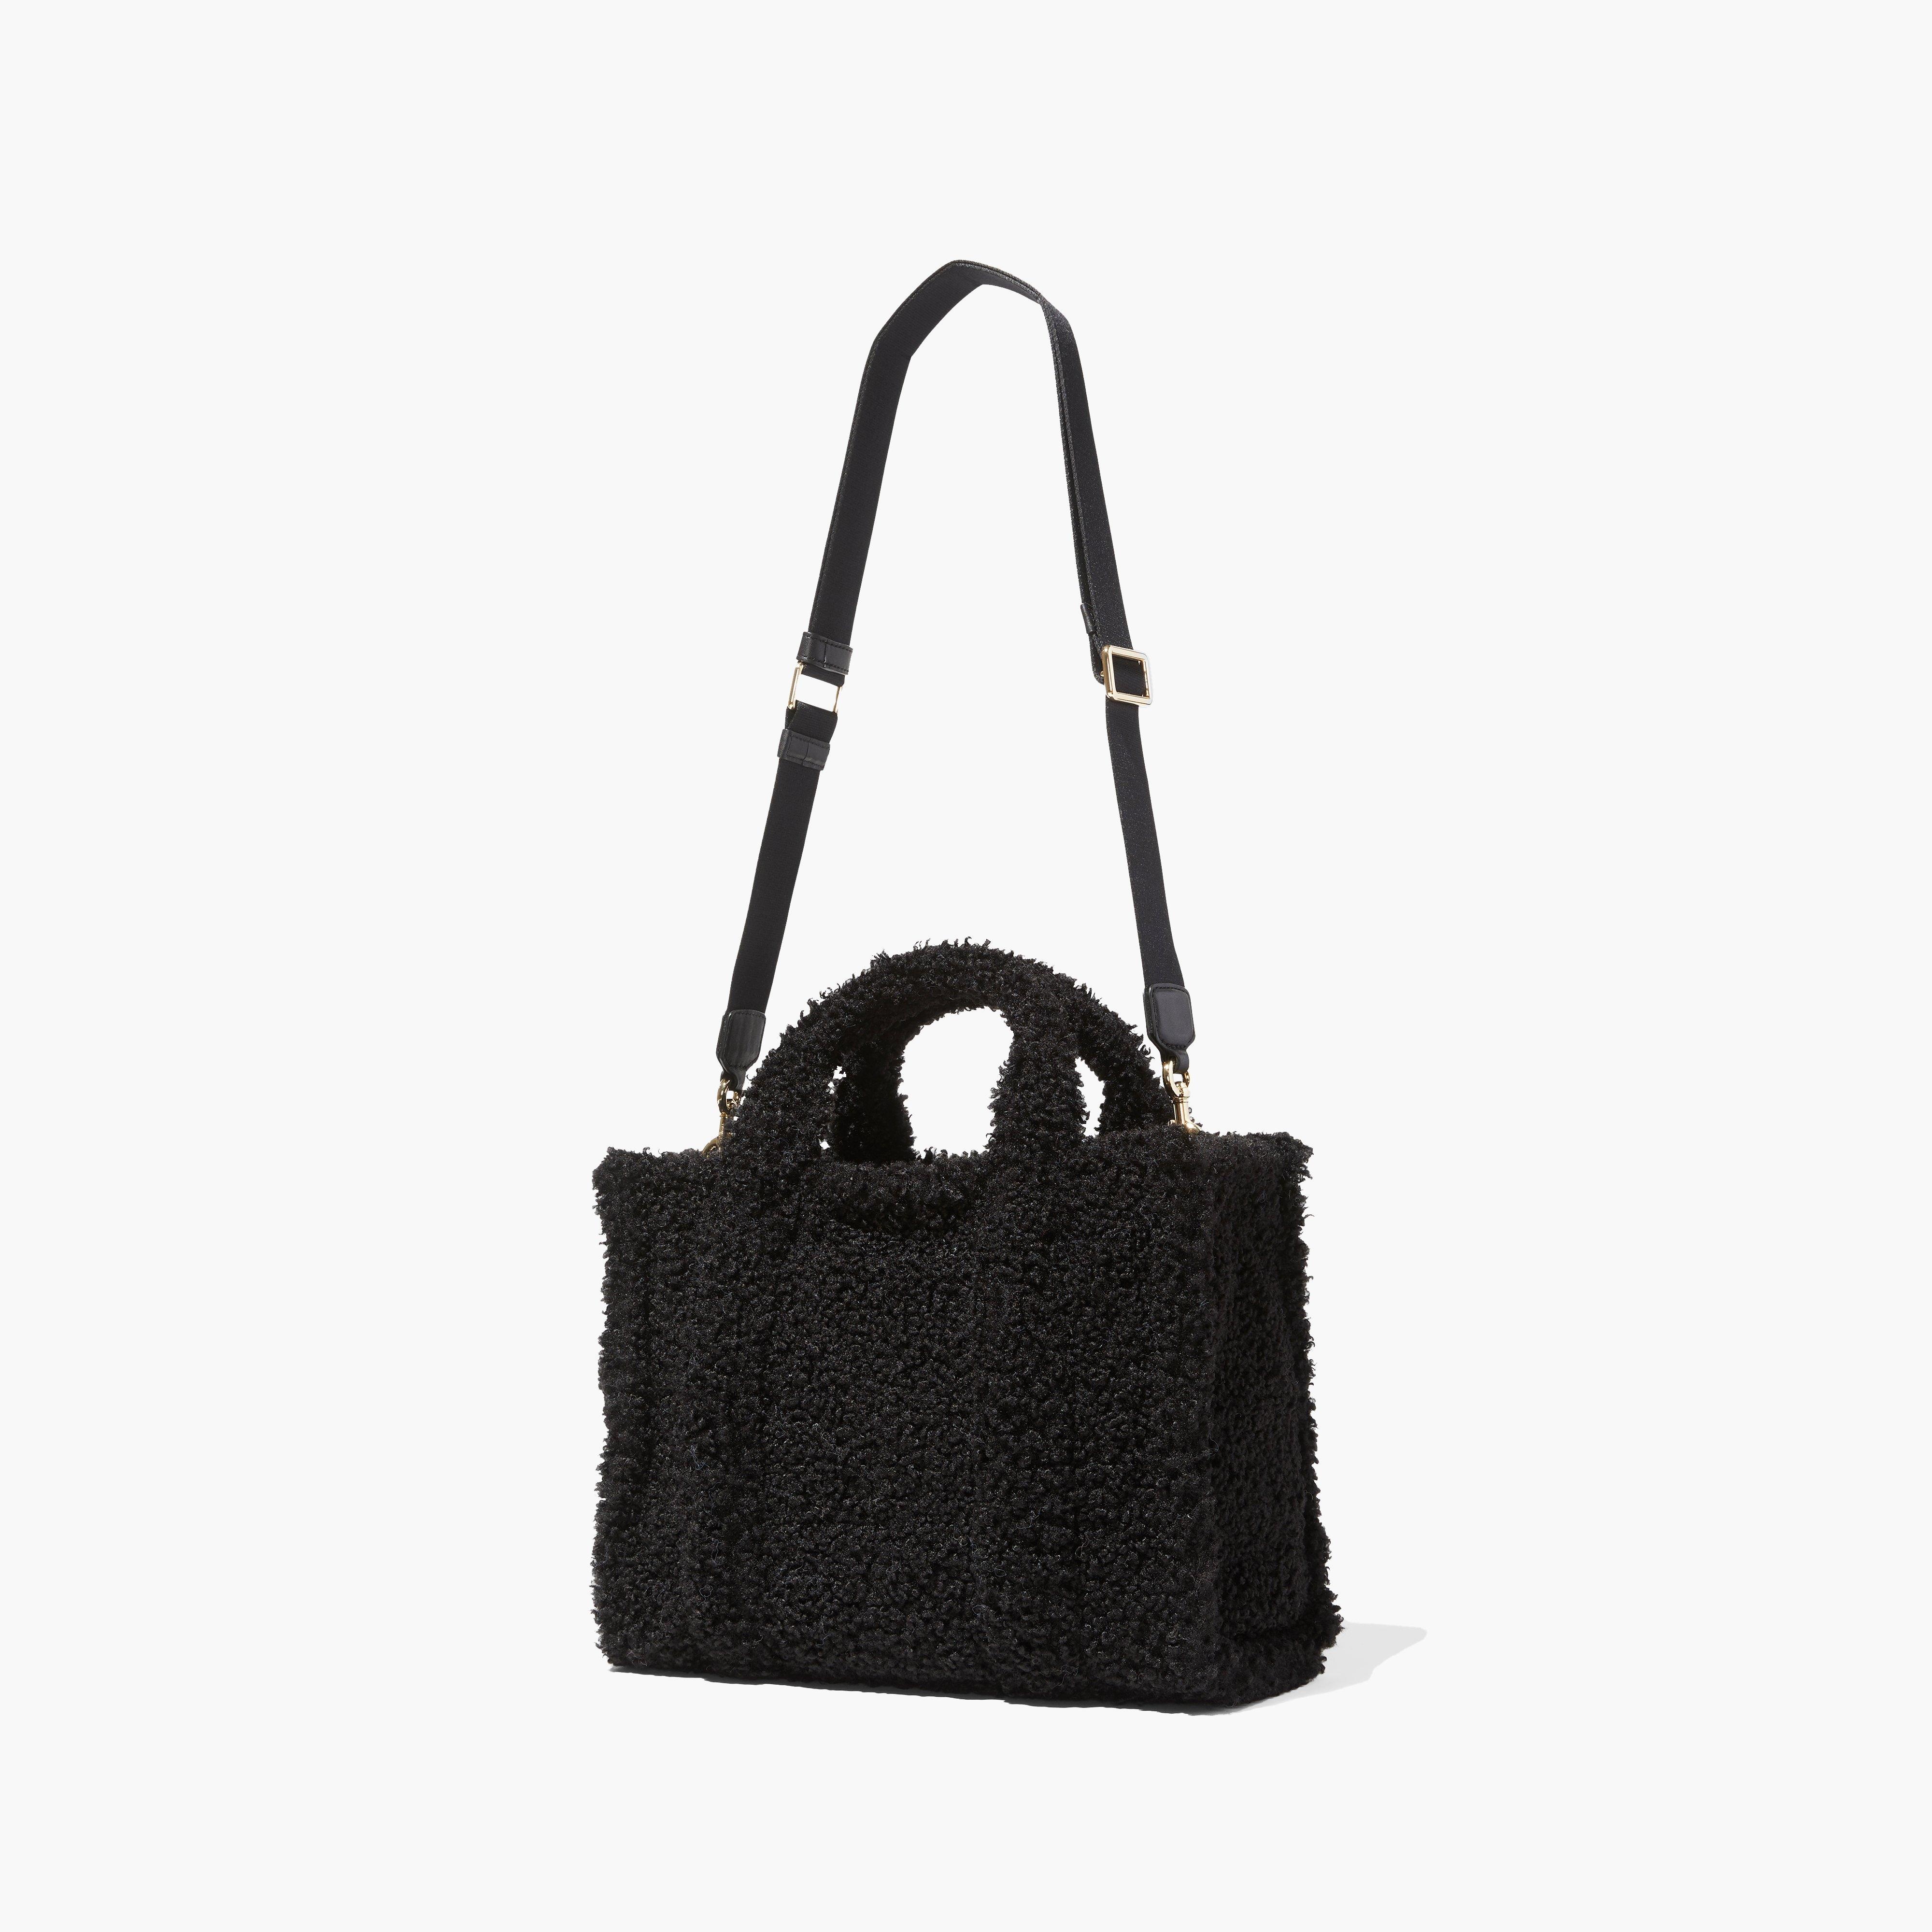 THE TEDDY SMALL TOTE BAG - 3